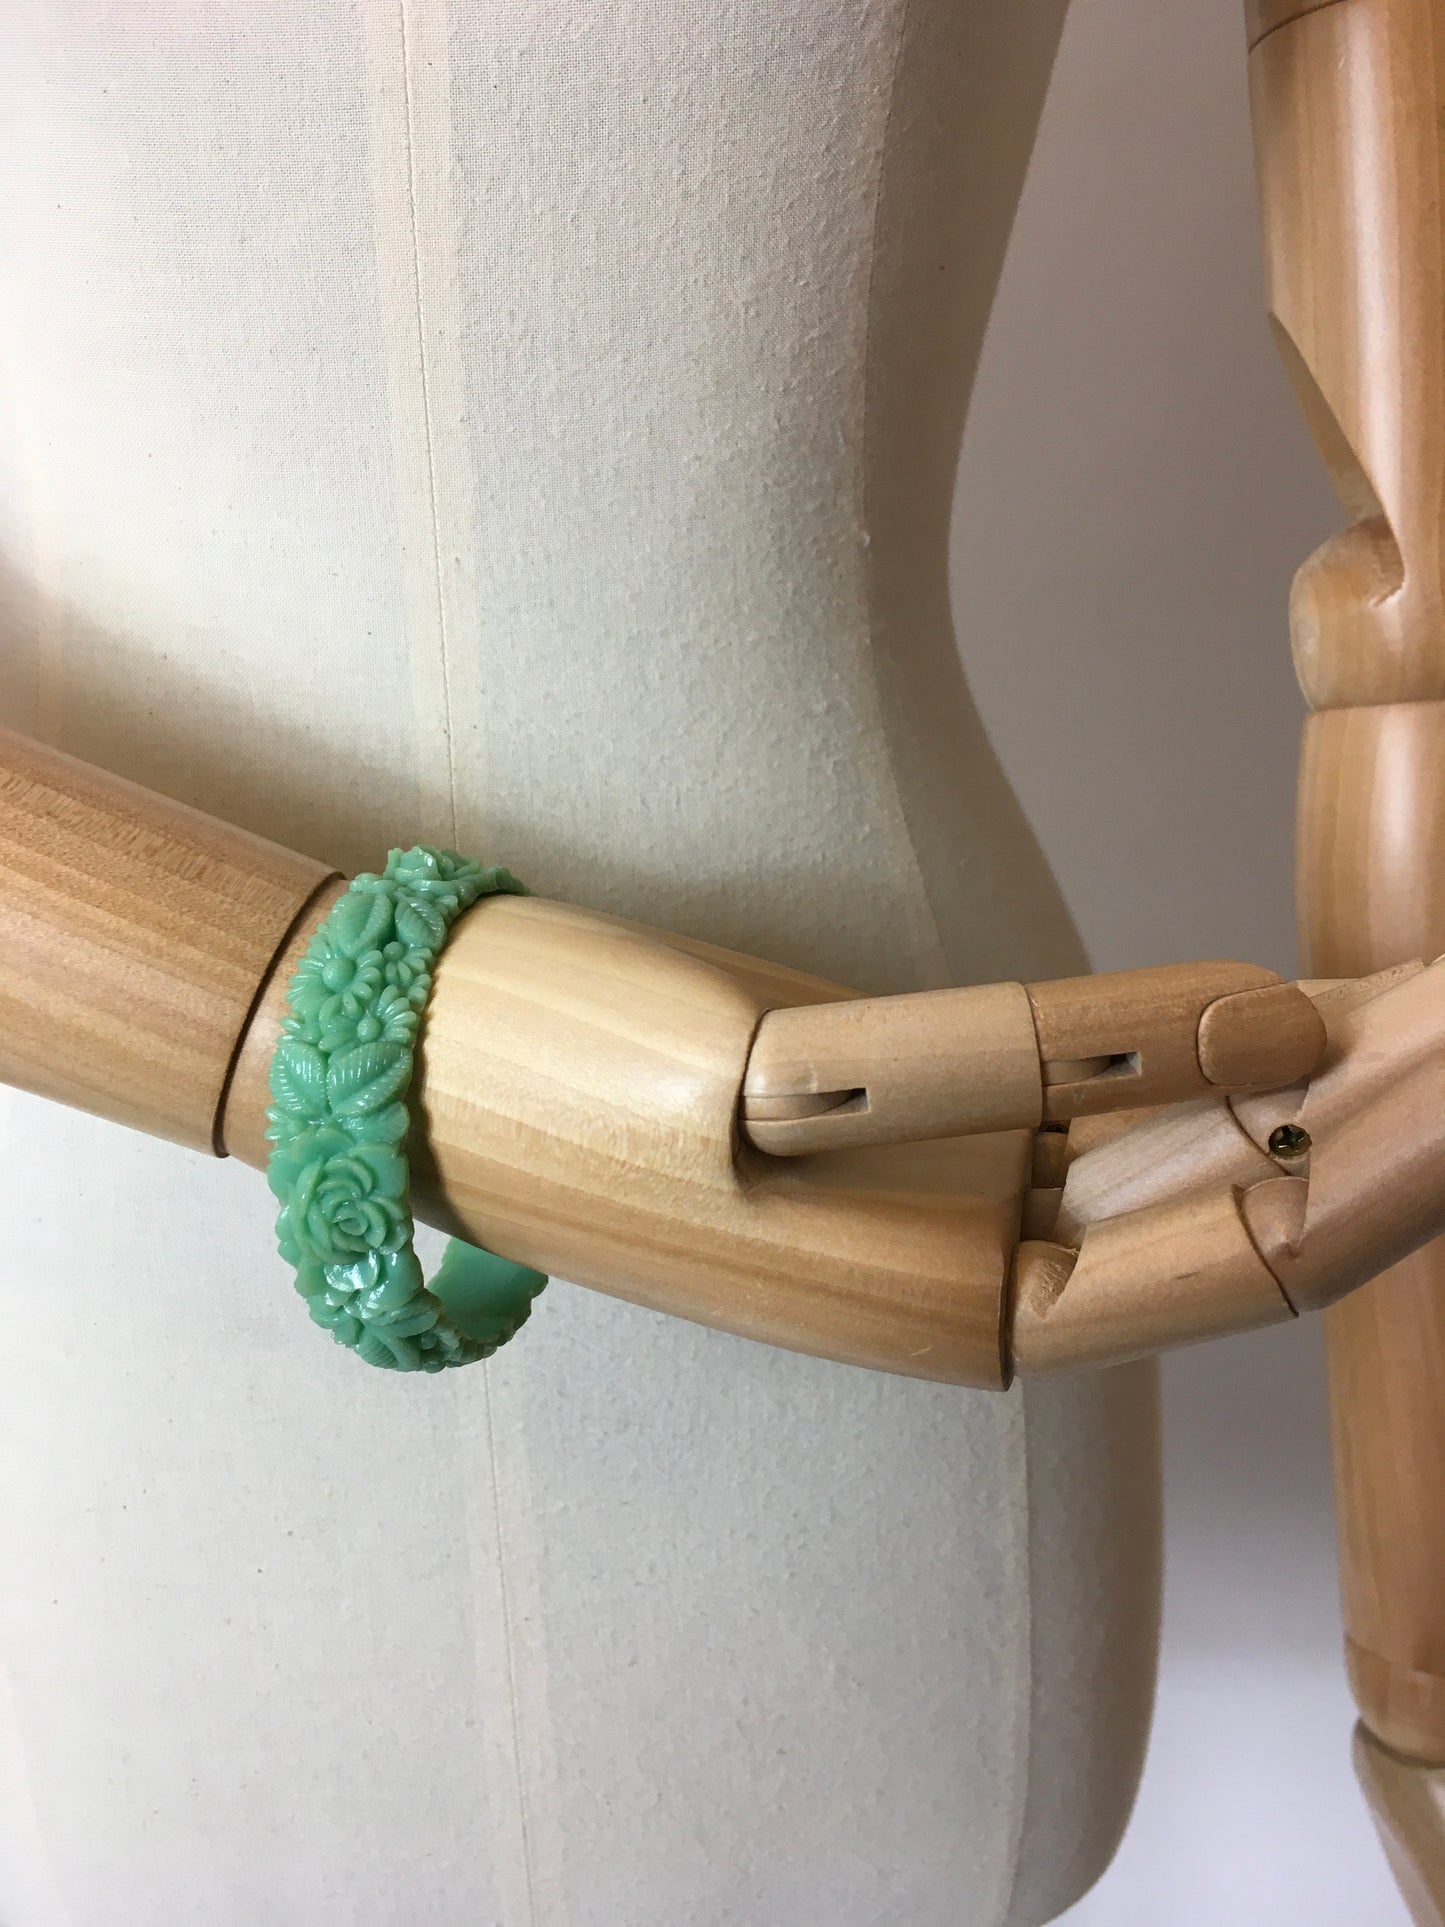 Original 1930’s Floral Carved Celluloid Bangle in Mint Green - Festival of Vintage Fashion Show Exclusive